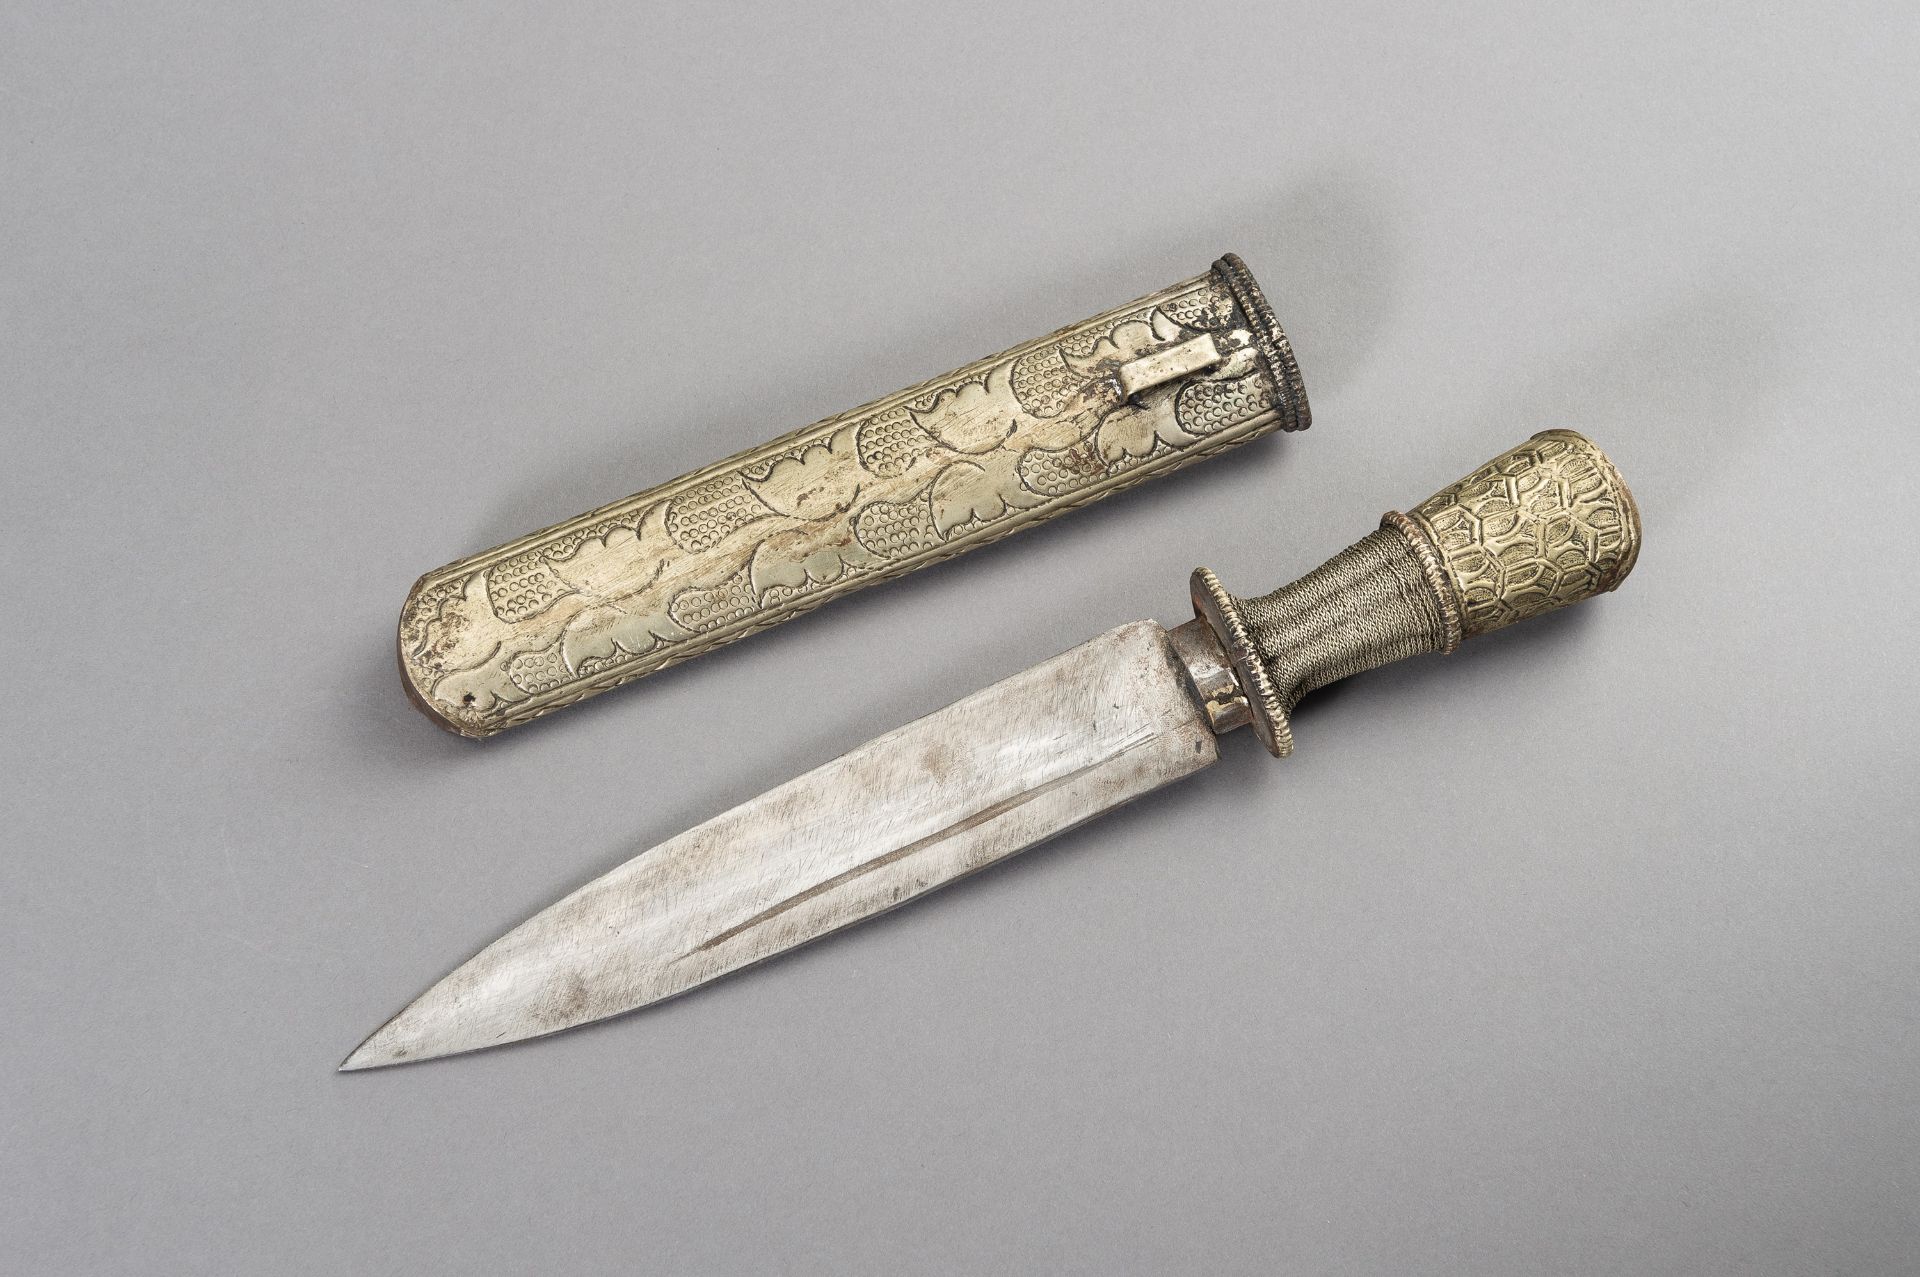 A 'BUDDHIST TREASURES' DAGGER, FIRST HALF OF THE 20TH CENTURY - Image 7 of 7